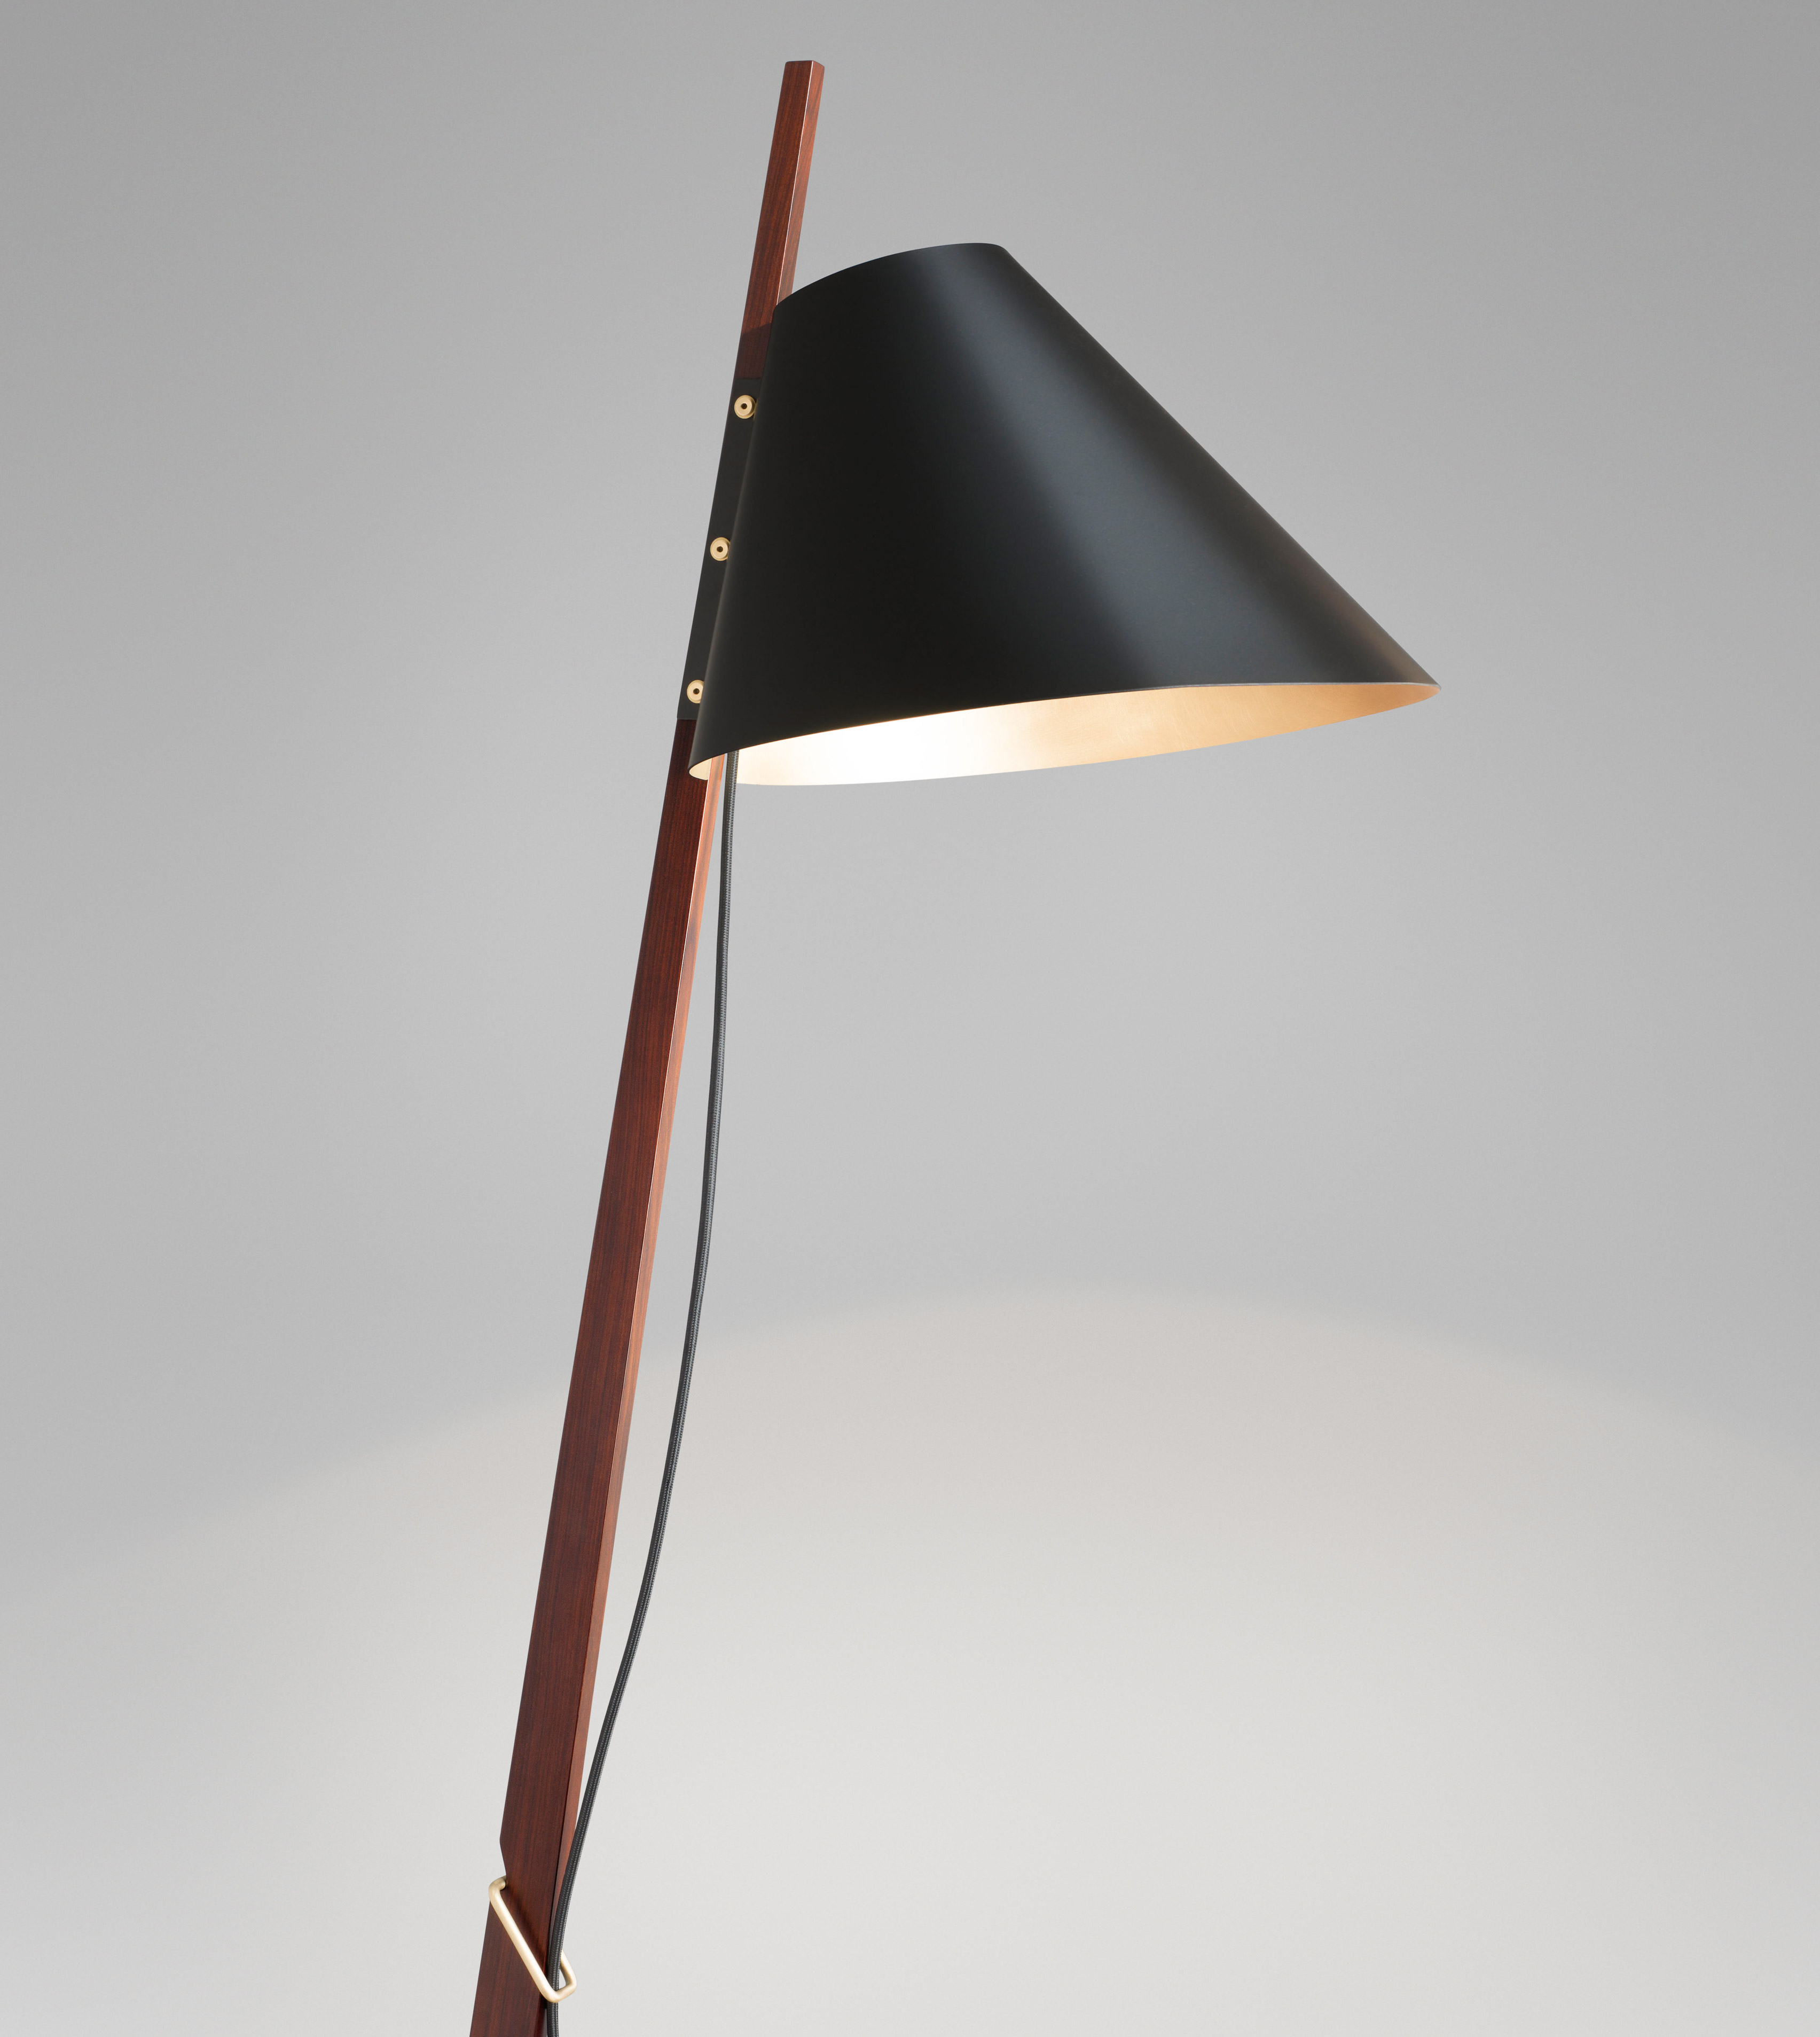 The lampshade features a duotone finish, matte black exterior with satin brass interior, creating an ambient feel